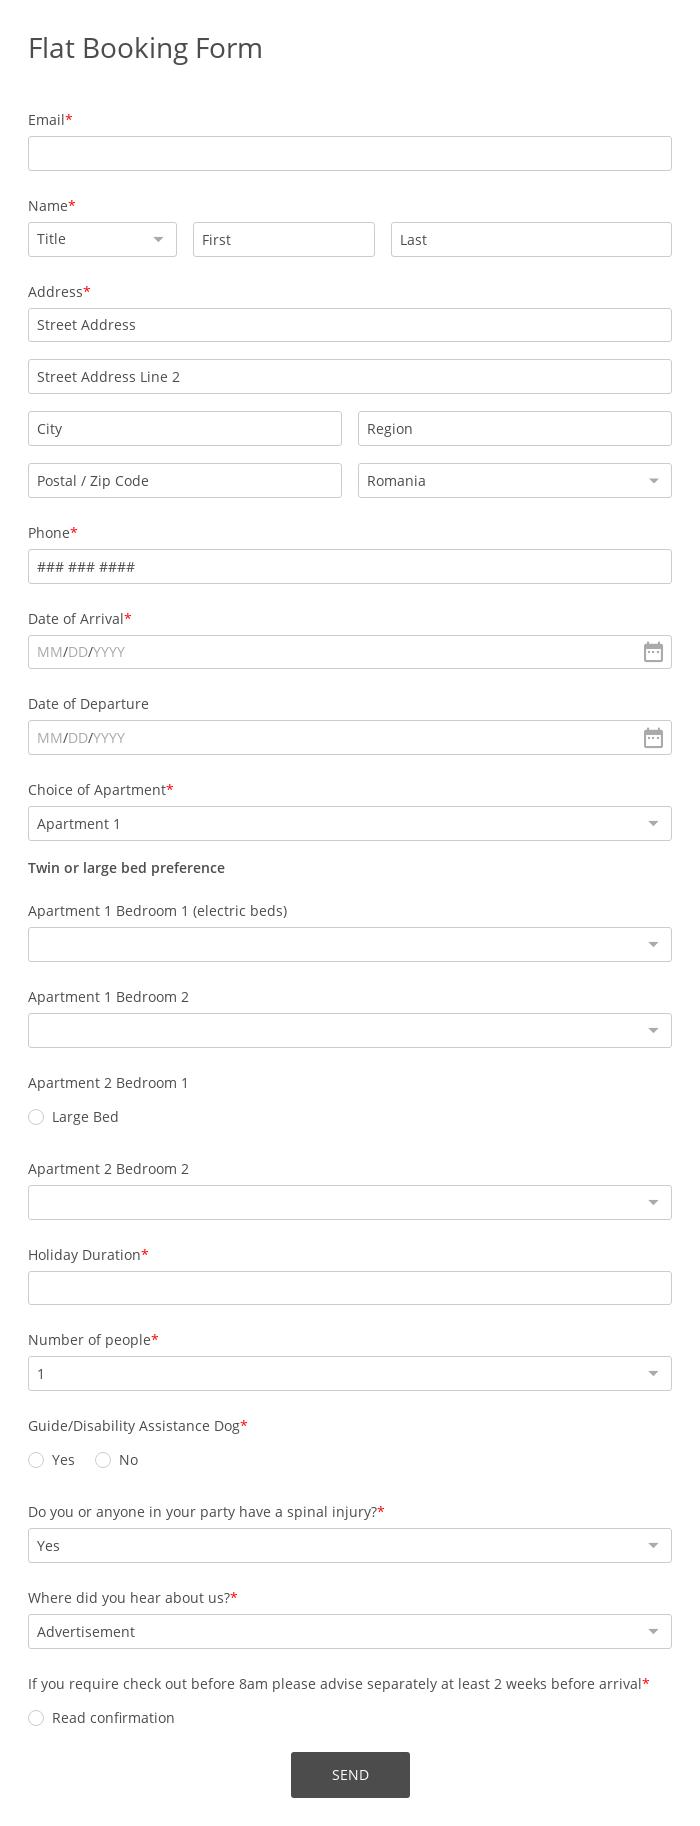 Flat Booking Form